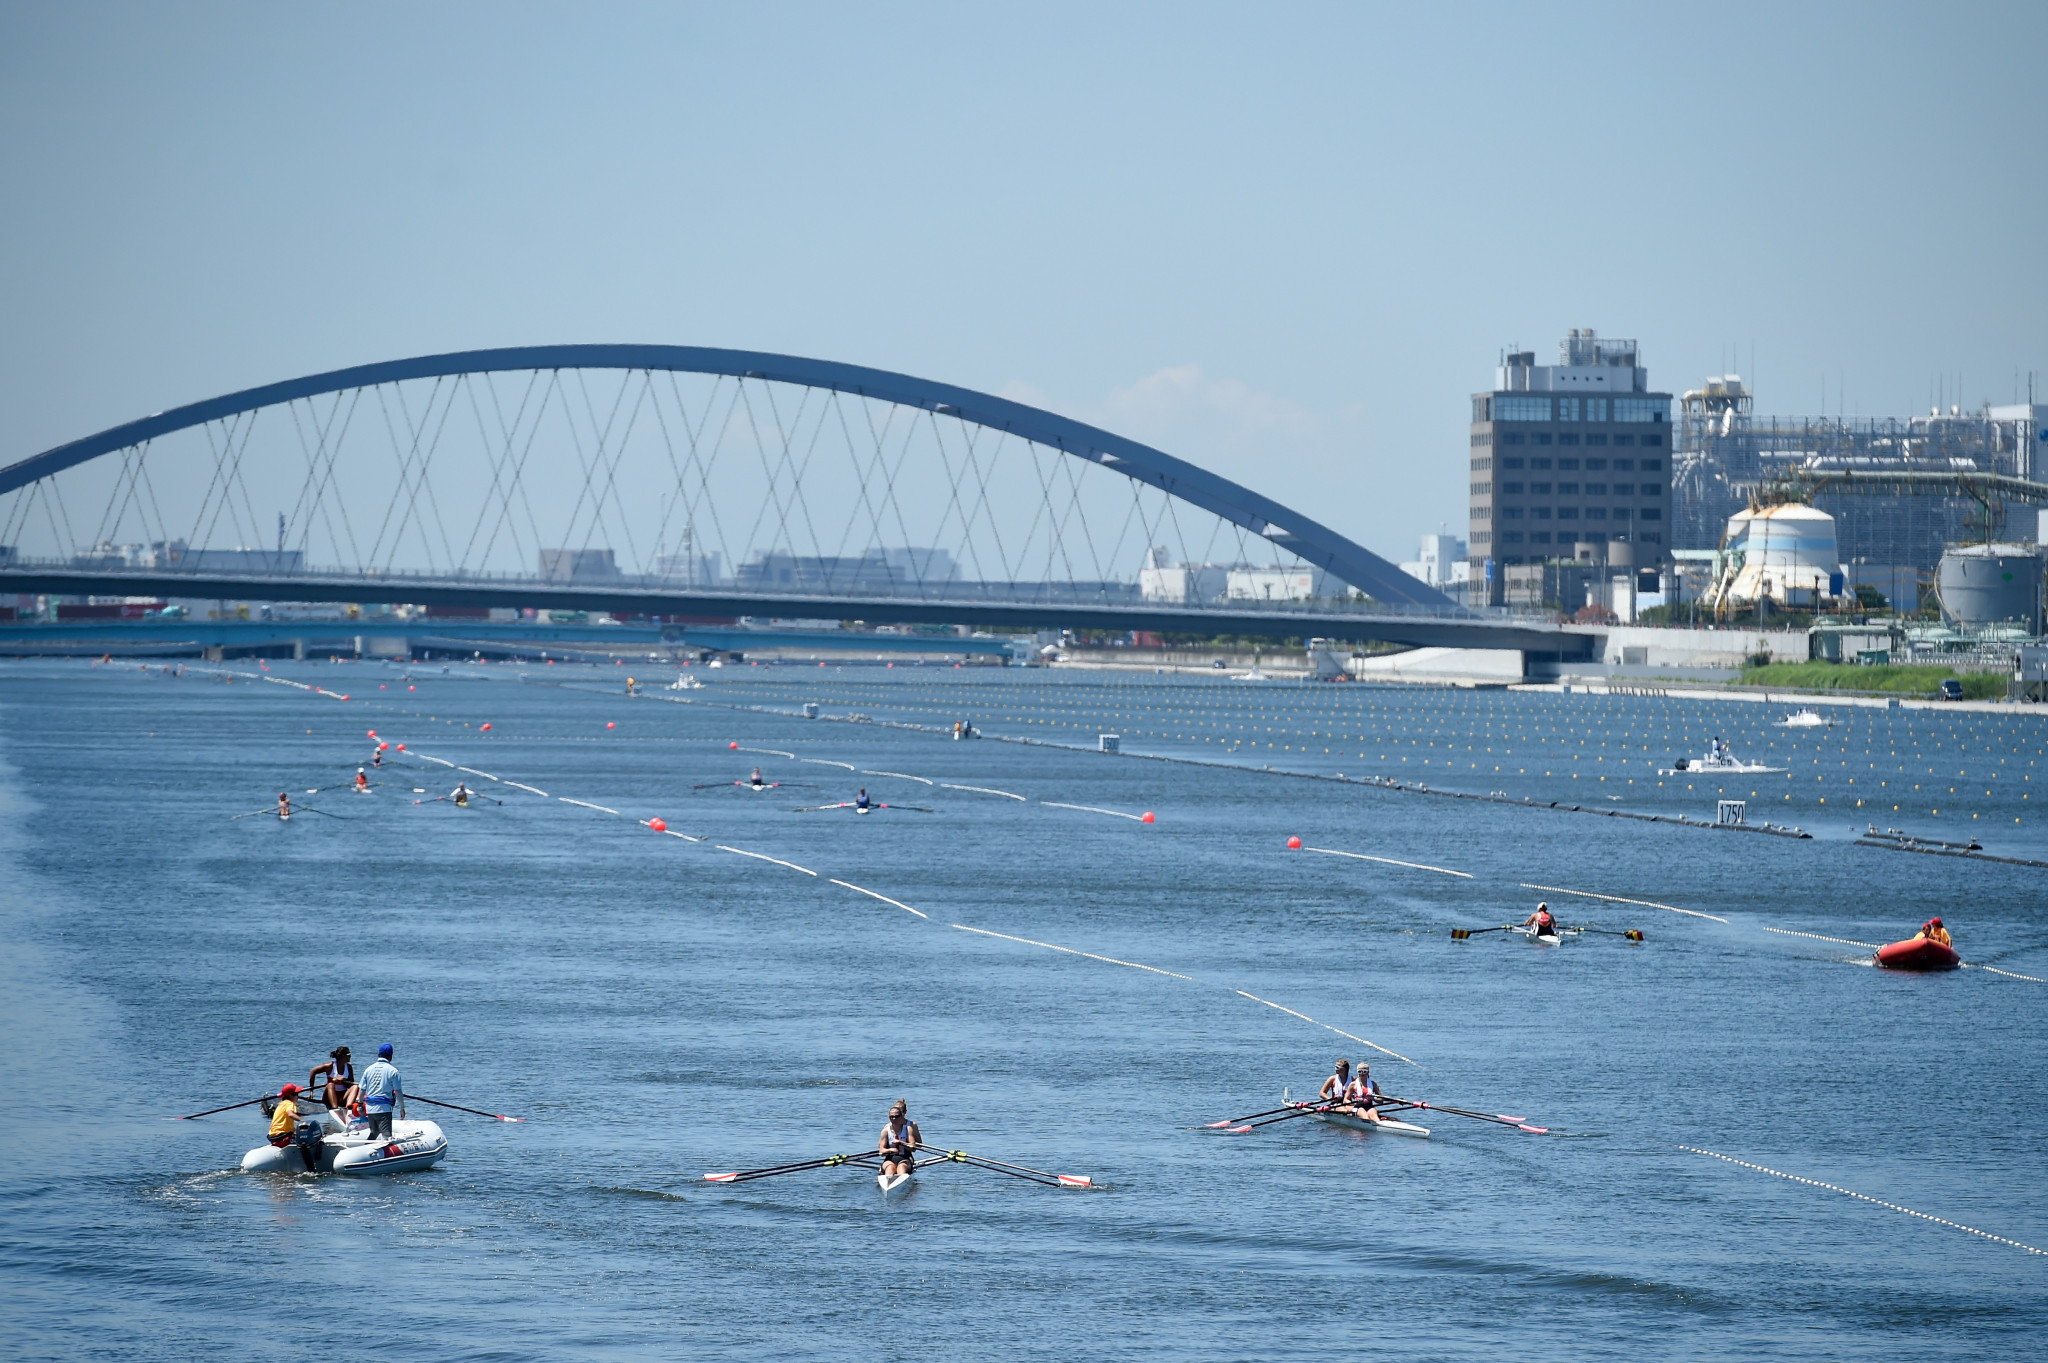 The Olympic Sea Forest Waterway venue is hosting competition  ©Getty Images